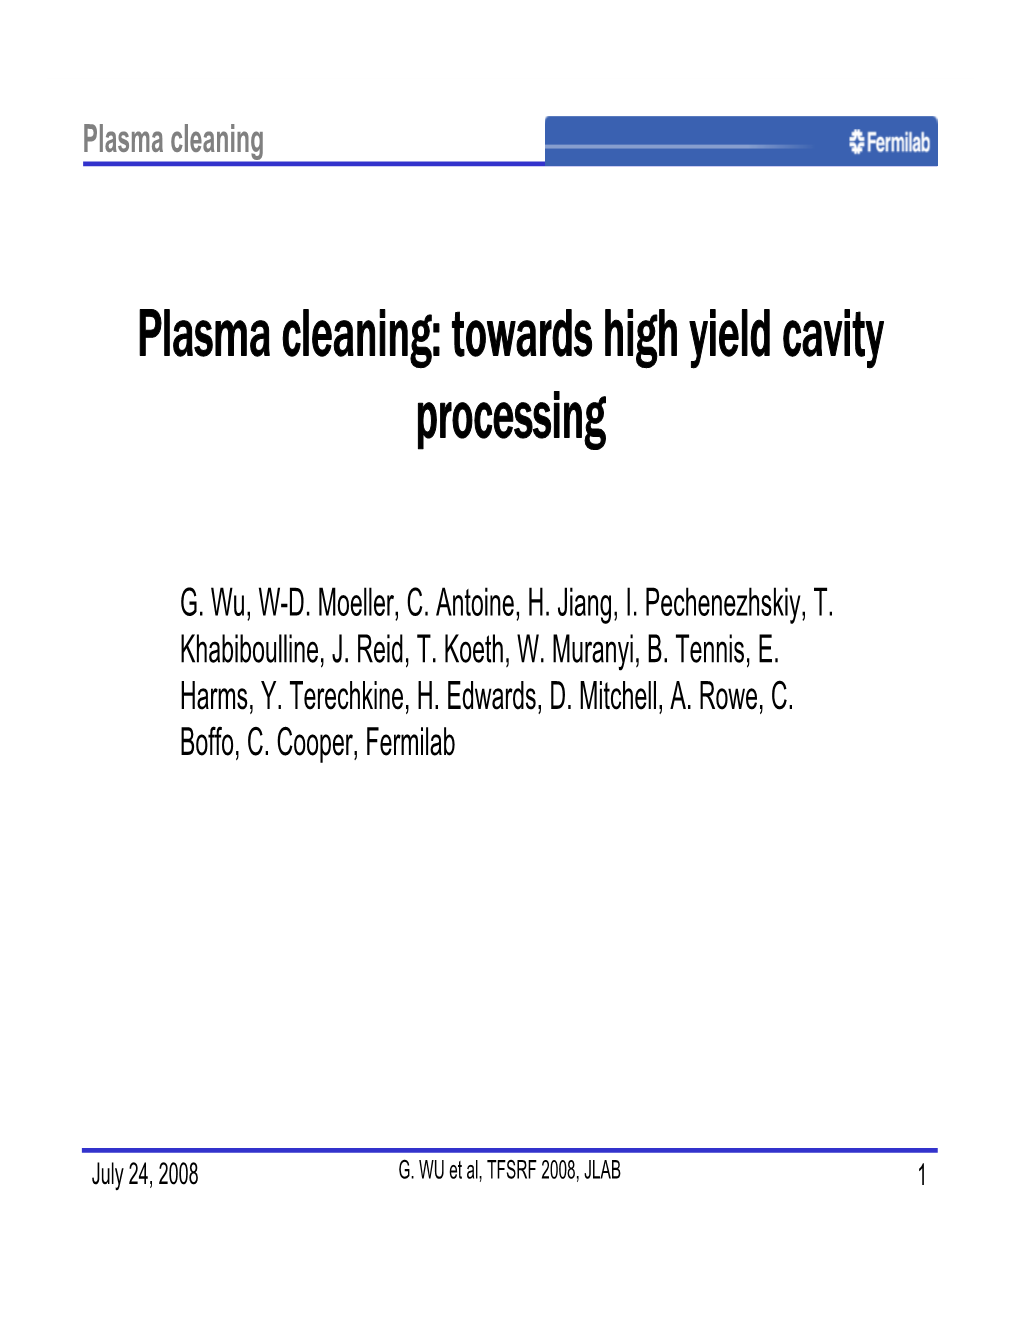 Plasma Cleaning: Towards High Yield Cavity Processing